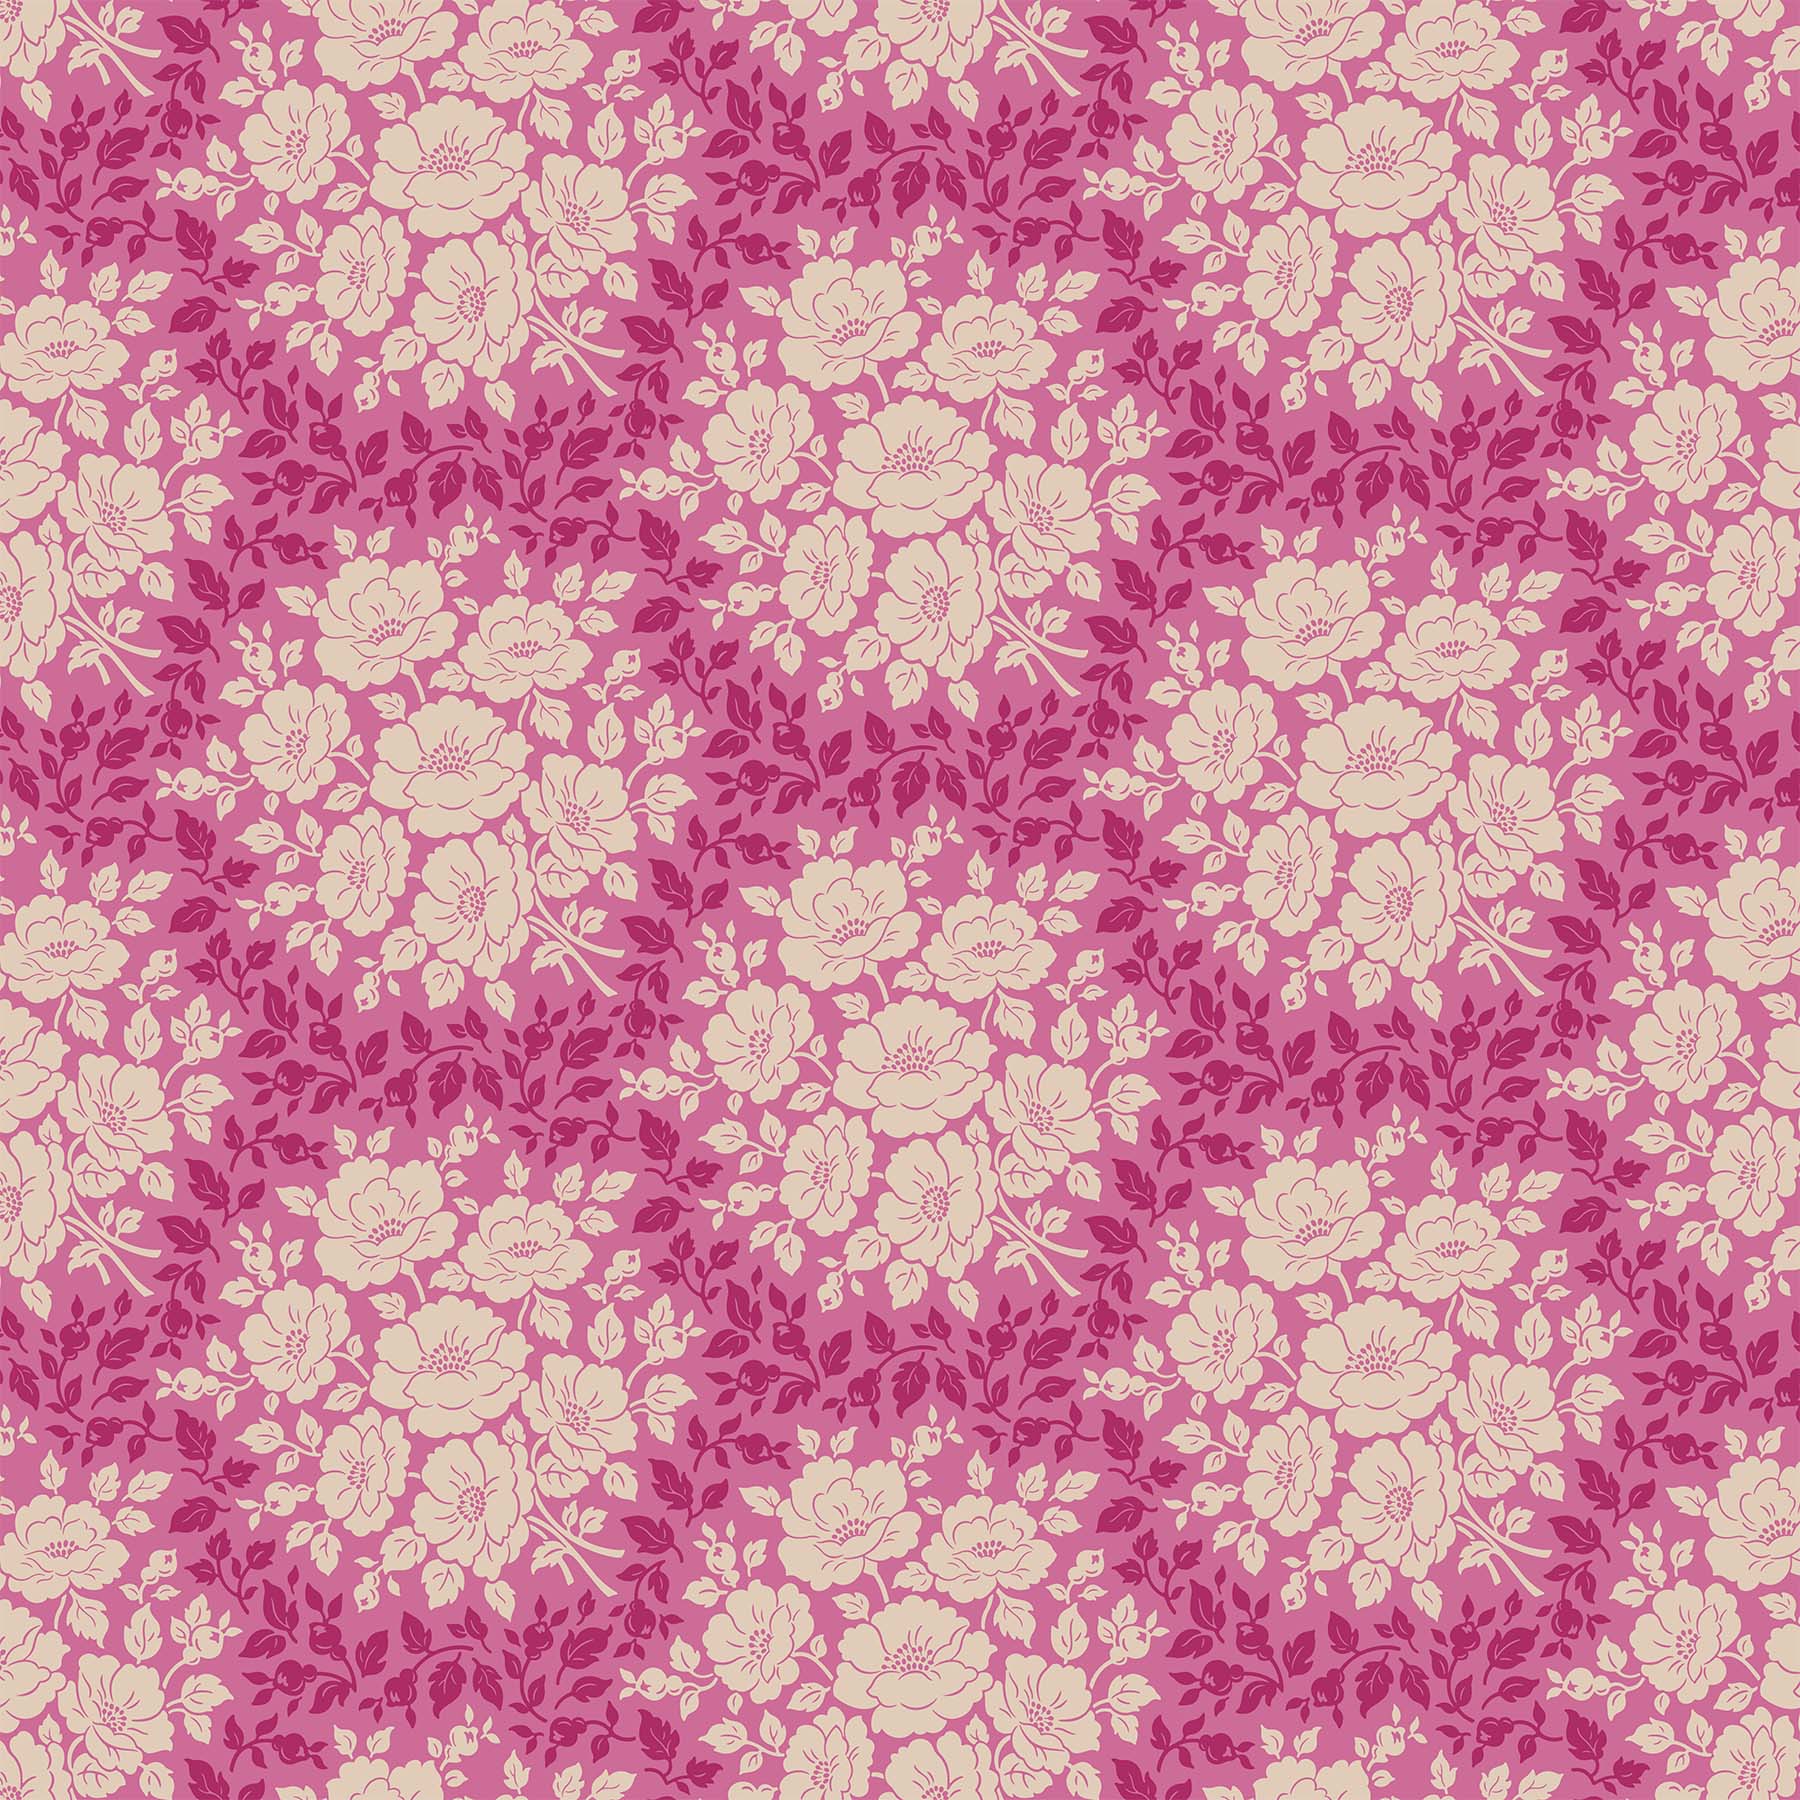 Local Honey Quilt Fabric - Morning Bloom on Violet Purple/Pink - 90659-28